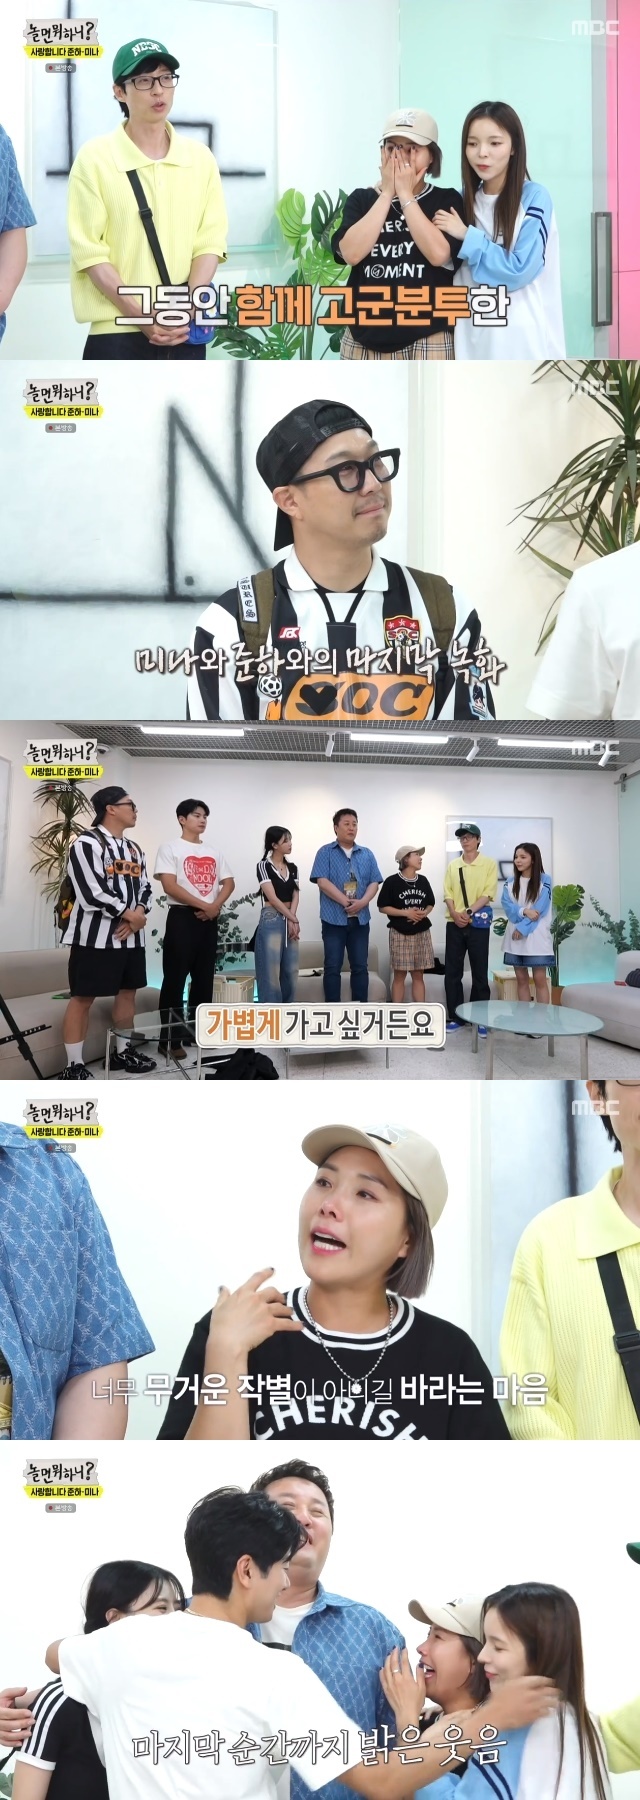 Jeong Jun-ha and Shin Bong-sun did a disjoint of tears.In the 189th episode of MBCs entertainment show Hangout with Yoo (hereinafter referred to as Noll What) broadcasted on June 10, the struggles of the members who challenged to upgrade the value of goods through Barter were depicted.On this day, Yoo Jae-Suk, Shin Bong-sun, and Park Jin-joo went to see Sul-yi according to the instructions of the production team, and suddenly they made a used deal with Citizen Seol-yi.Likewise, the citizens who came to the used trade without knowing the members did not know how to come, and in the situation of embarrassment, the members purchased the cost 7,500 won Calendar for 2,000 won.At the same time, Haha and Lee Yi-kyung, Jeong Jun-ha and Lee Mi-joo also teamed up and started an unexpected second-hand deal.I had to increase the value by bartering Calendar like the contents of the fairy tale that it became the son-in-law of the tall rice.Yoo Jae-Suk team signed Calendar and changed it with handkerchief and Barter du Merry Gold car. Yoo Jae-Suk, who was worried about who to exchange with, recalled Jo Se-ho, who is appearing in Gangnam by this time.Yoo Jae-Suk immediately called and immediately contacted Jo Se-ho, who came out of the exercise.Jo Se-ho appeared to be the most scruffy of all time, and his head was hurriedly picked up in the bathroom of a nearby department store.Jo Se-ho said, In the afternoon, this brand representative should come to Korea and go to the event.Jo Se-ho changed three socks and a Mary Gold car. Yoo Jae-Suk confidently pulled out his Jo Se-ho socks, saying, Its only one month different. I buy a car.However, Lee Yi-kyung and Jeong Jun-ha said, What do you have for 3,000 won? and Do you have only Jo Se-ho?There was a reason they ignored the Yoo Jae-suk teams stuff.Like Yoo Jae-Suk, it was a set of beef for 120,000 won for Jeong Jun-ha team and a golf putter for 500,000 won for Haha team.Yoo Jae-Suk caused a pupil earthquake on an unexpected scale.There was not much time left to determine Barters winner, so Yoo Jae-Suk confessed, Ill tell you one thing. I used to be at the bottom of the Infinite Challenge war.Then Shin Bong-sun and Park Jin-joo started criticizing Yoo Jae-suk, saying, Why are you talking about that now? Then you ignored me from the beginning. Why are you taking the lead when you said you were in last place? Youve never done a used trade.Yoo Jae-Suk did not have a zero talent for Barter.In addition to trying to exchange for elastic bandages and lip gloss that are cheaper than 30,000 won socks, the other citizens goods seemed too expensive for the opportunity that came, and he frankly disclosed the value, saying, It costs only 25,000 won.Shin Bong-sun and Park Jin-joo were frustrated with Yoo Jae-suk, saying, No, why do you have to pay the price? Stay still.On the other hand, Yoo Jae-Suk looked at Shin Bong-sun and Park Jin-joo, who are looking for citizens goods, and asked, Are you a neighborhood bully?As a result, Yoo Jae-suk team won 65,000 won rain boots, Jeong Jun-ha team won 200,000 won limited edition shoes, and Haha team won 1.5 million won painting of Lee Yi-kyung friend who is working as a painting artist.Yoo Jae-Suk admired the Haha team, which has been valued at 750 times, saying, Stop your broadcasting and continue this. Ill leave with my backpack and see you in a year.Still, Haha and Lee Yi-kyung bluffed, If you have a grain of rice, you can set up a Cage rice mill.On the other hand, at the end of Broadcasting, Yoo Jae-Suk announced the broadcasting disjoint of Jeong Jun-ha and Shin Bong-sun and the reorganization of broadcasting for two weeks.Yoo Jae-Suk said, I have to tell you one thing. I have time to reorganize.Mina (Shin Bong-sun) and Jun-ha, who have been with Cage for a while, will be recording for the last time today. Jeong Jun-ha said, I dont think Ive shown you a better picture. I feel sorry for you, and I think you need more energy to make sure that youre on a roll. Shin Bong-sun said with tears, I wish I could go lightly.I want the rest of the human to feel comfortable, and I want to go to the Cage comfortably. Jeong Jun-ha said, Is not it a Cage family?Do not worry too much because you are happy, and ask your family whenever you need it. 